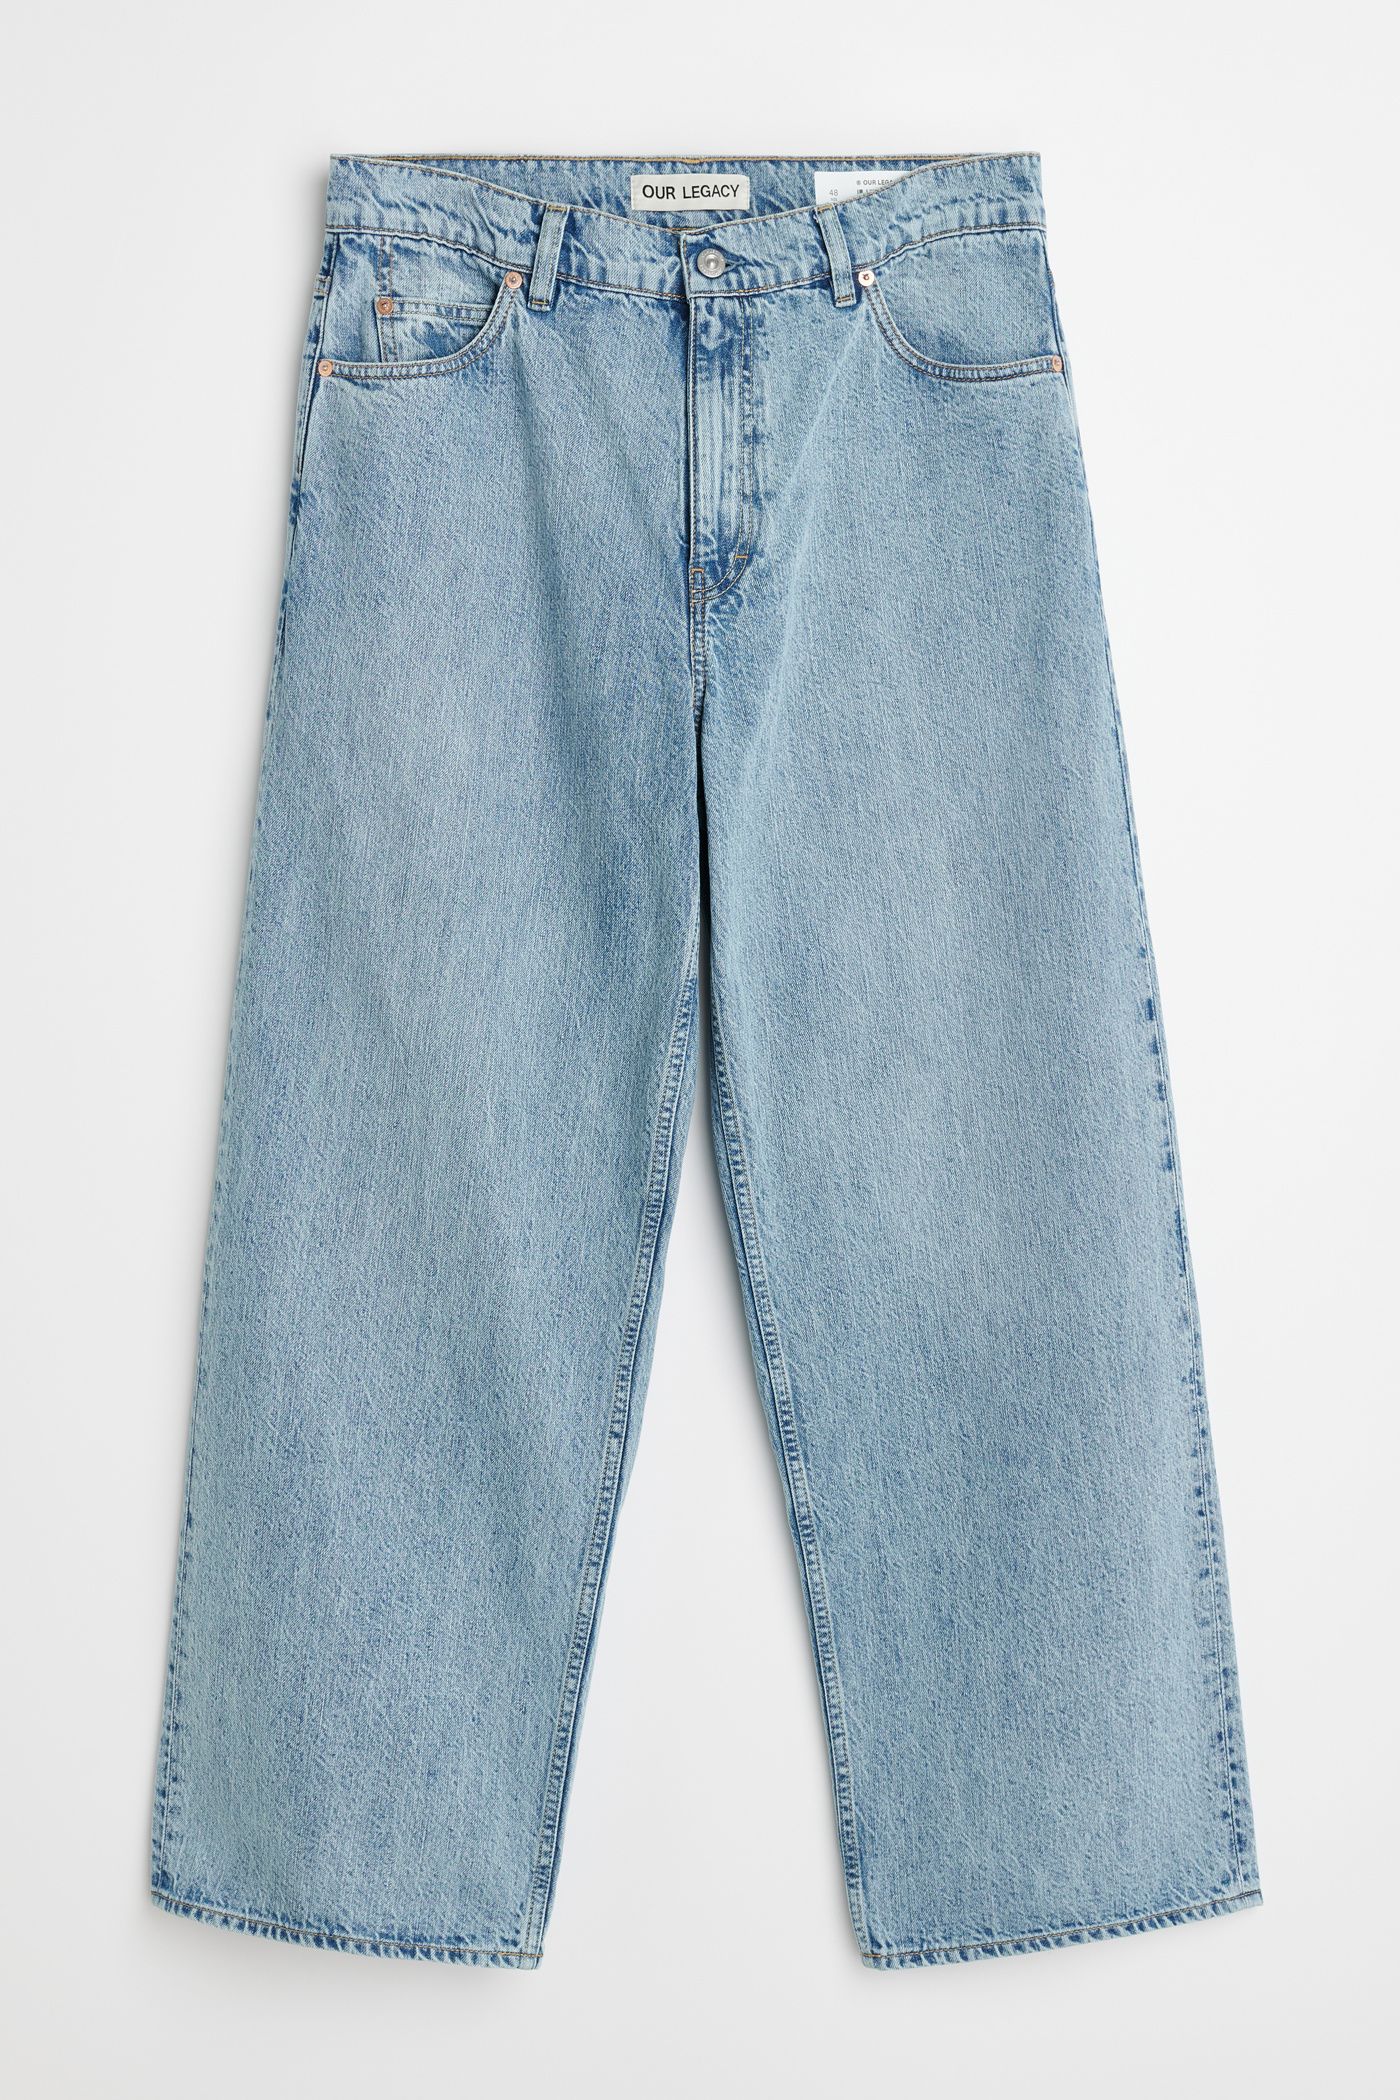 Pre-owned Our Legacy $420 Vast Cut Jeans • Rider Wash Denim Blue • 46 / 32